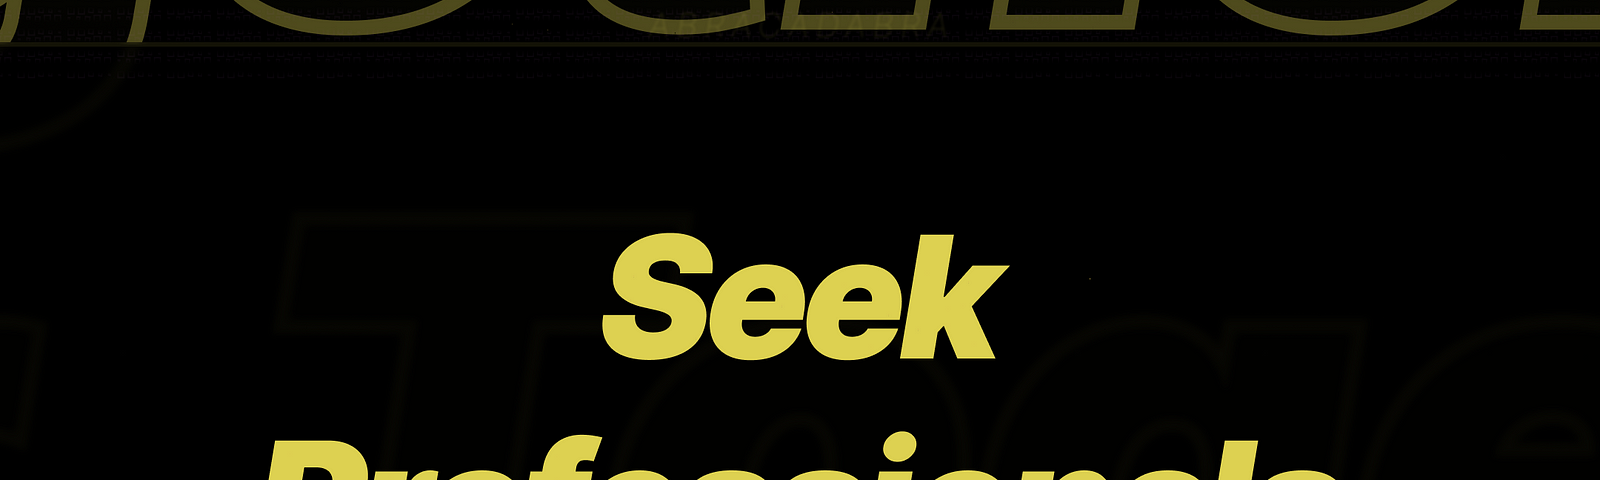 Stalk Yourself image from Arnaud Revel Goulihi’s article with “Seek Professionals” written.